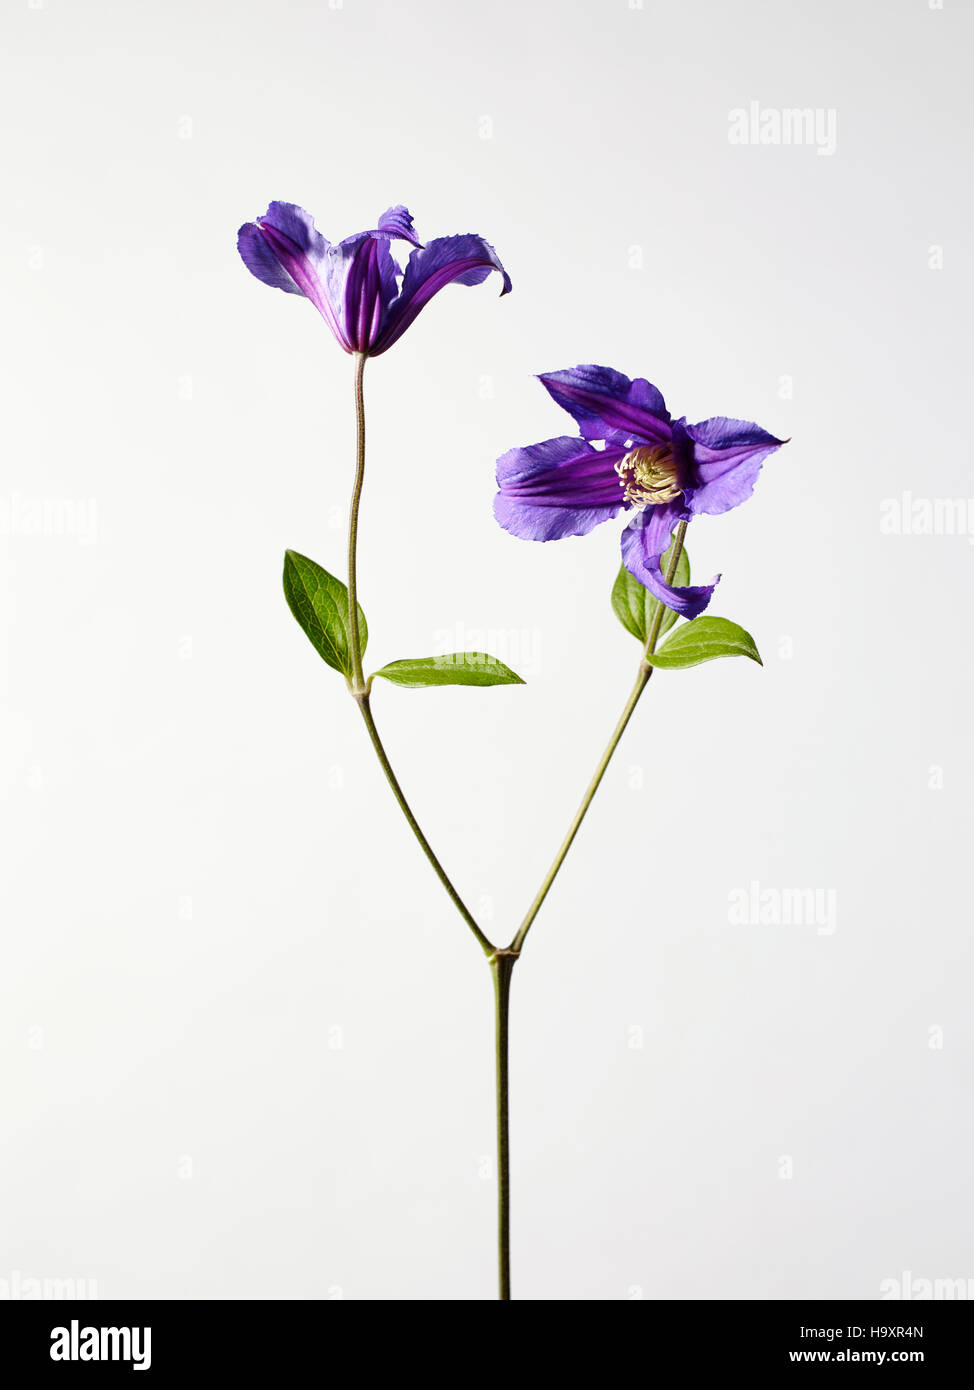 studio still life photograph of purple clematis Flowers two flower heads, bright coloured petals in bloom Stock Photo